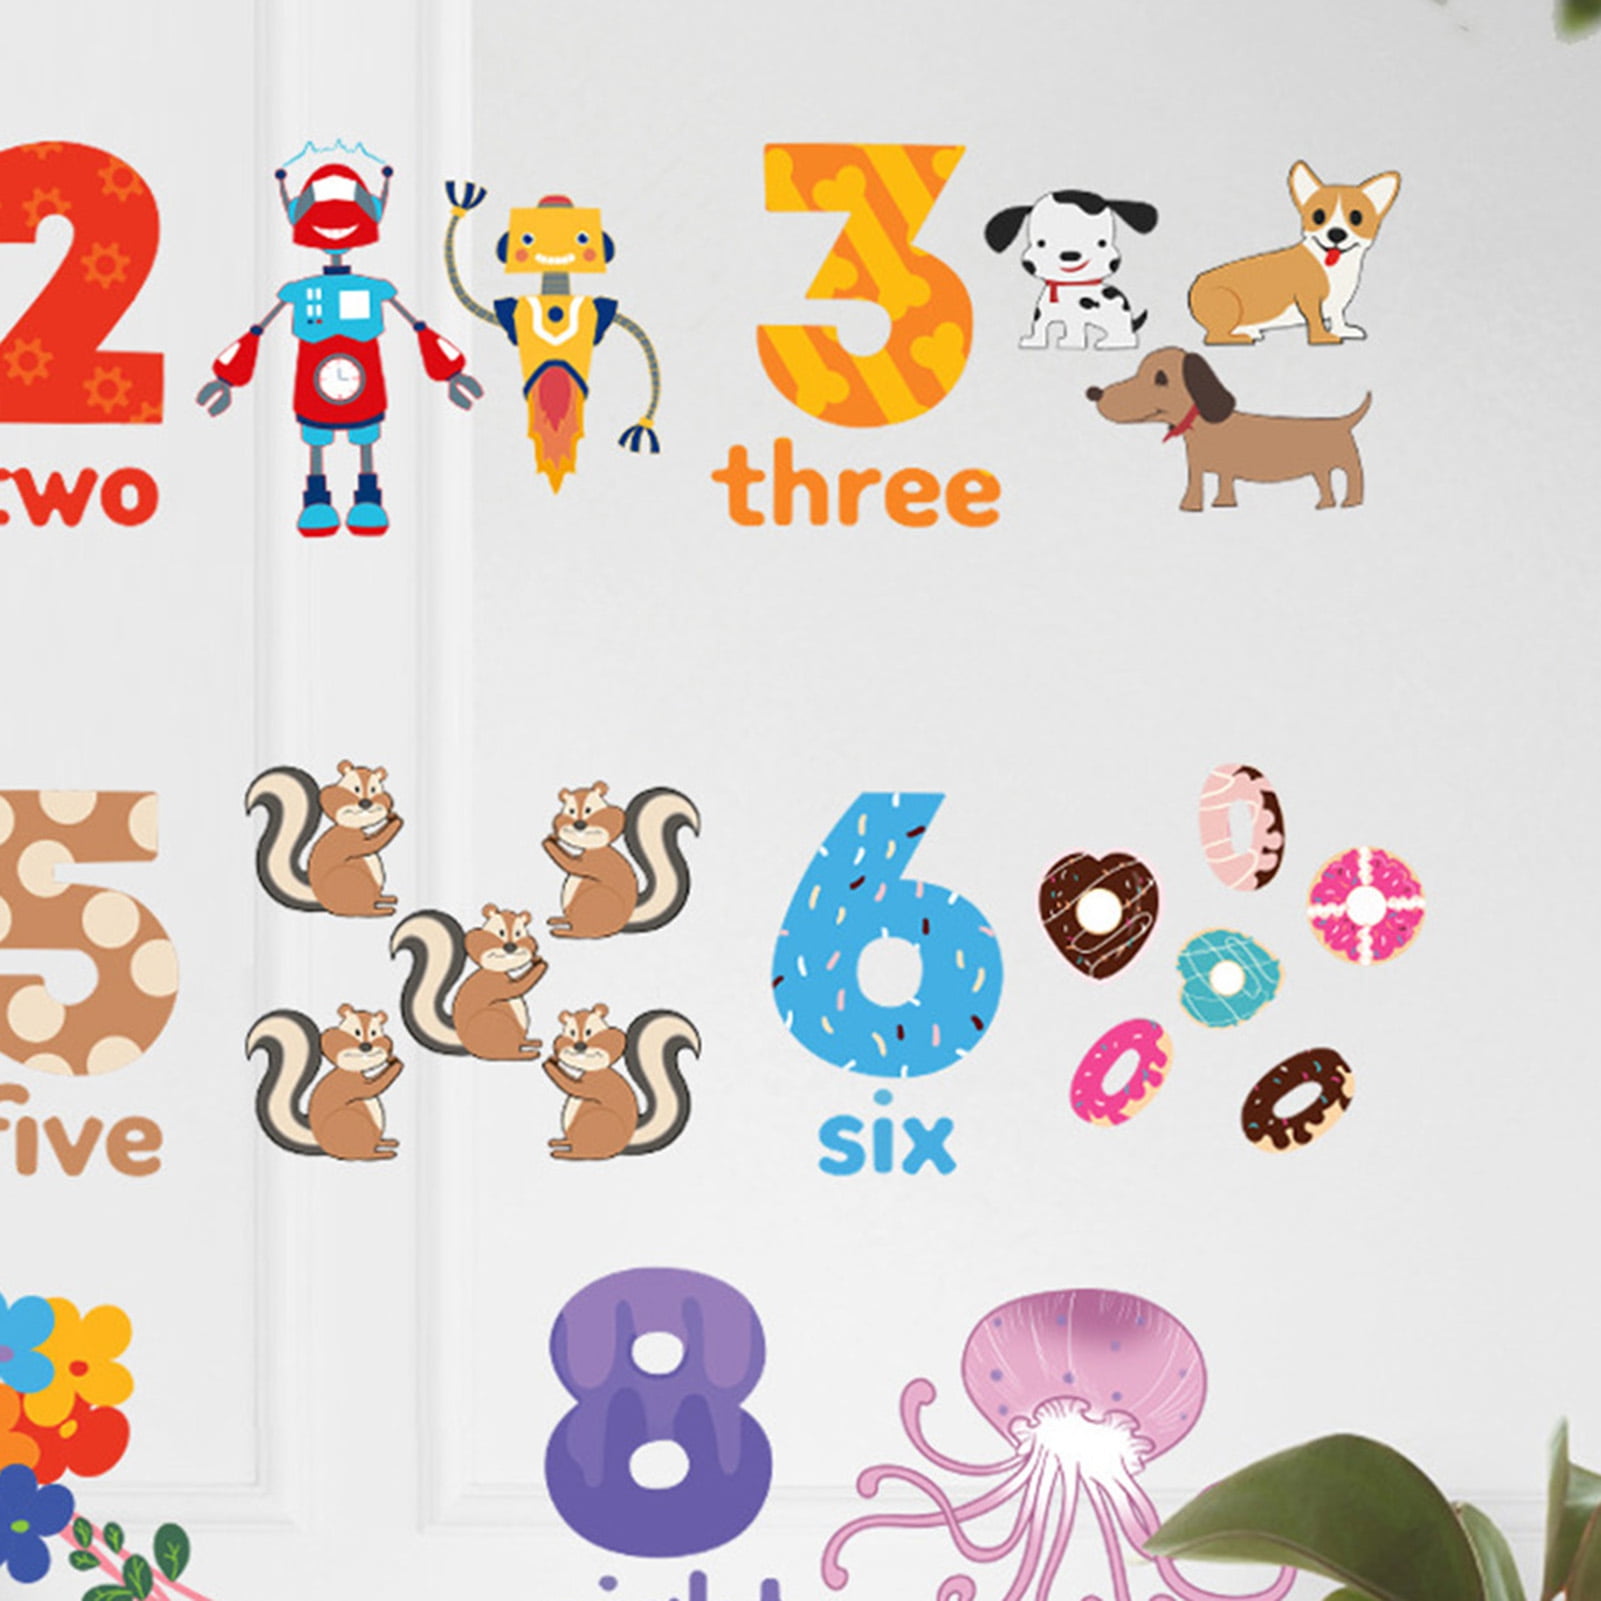 VEAREAR 2Pcs/Set Number Wall Sticker Cartoon 1-10 Numbers Animal English  Words Educational PVC Living Room Number Learning Wall Decal Kindergarten  Supplies 